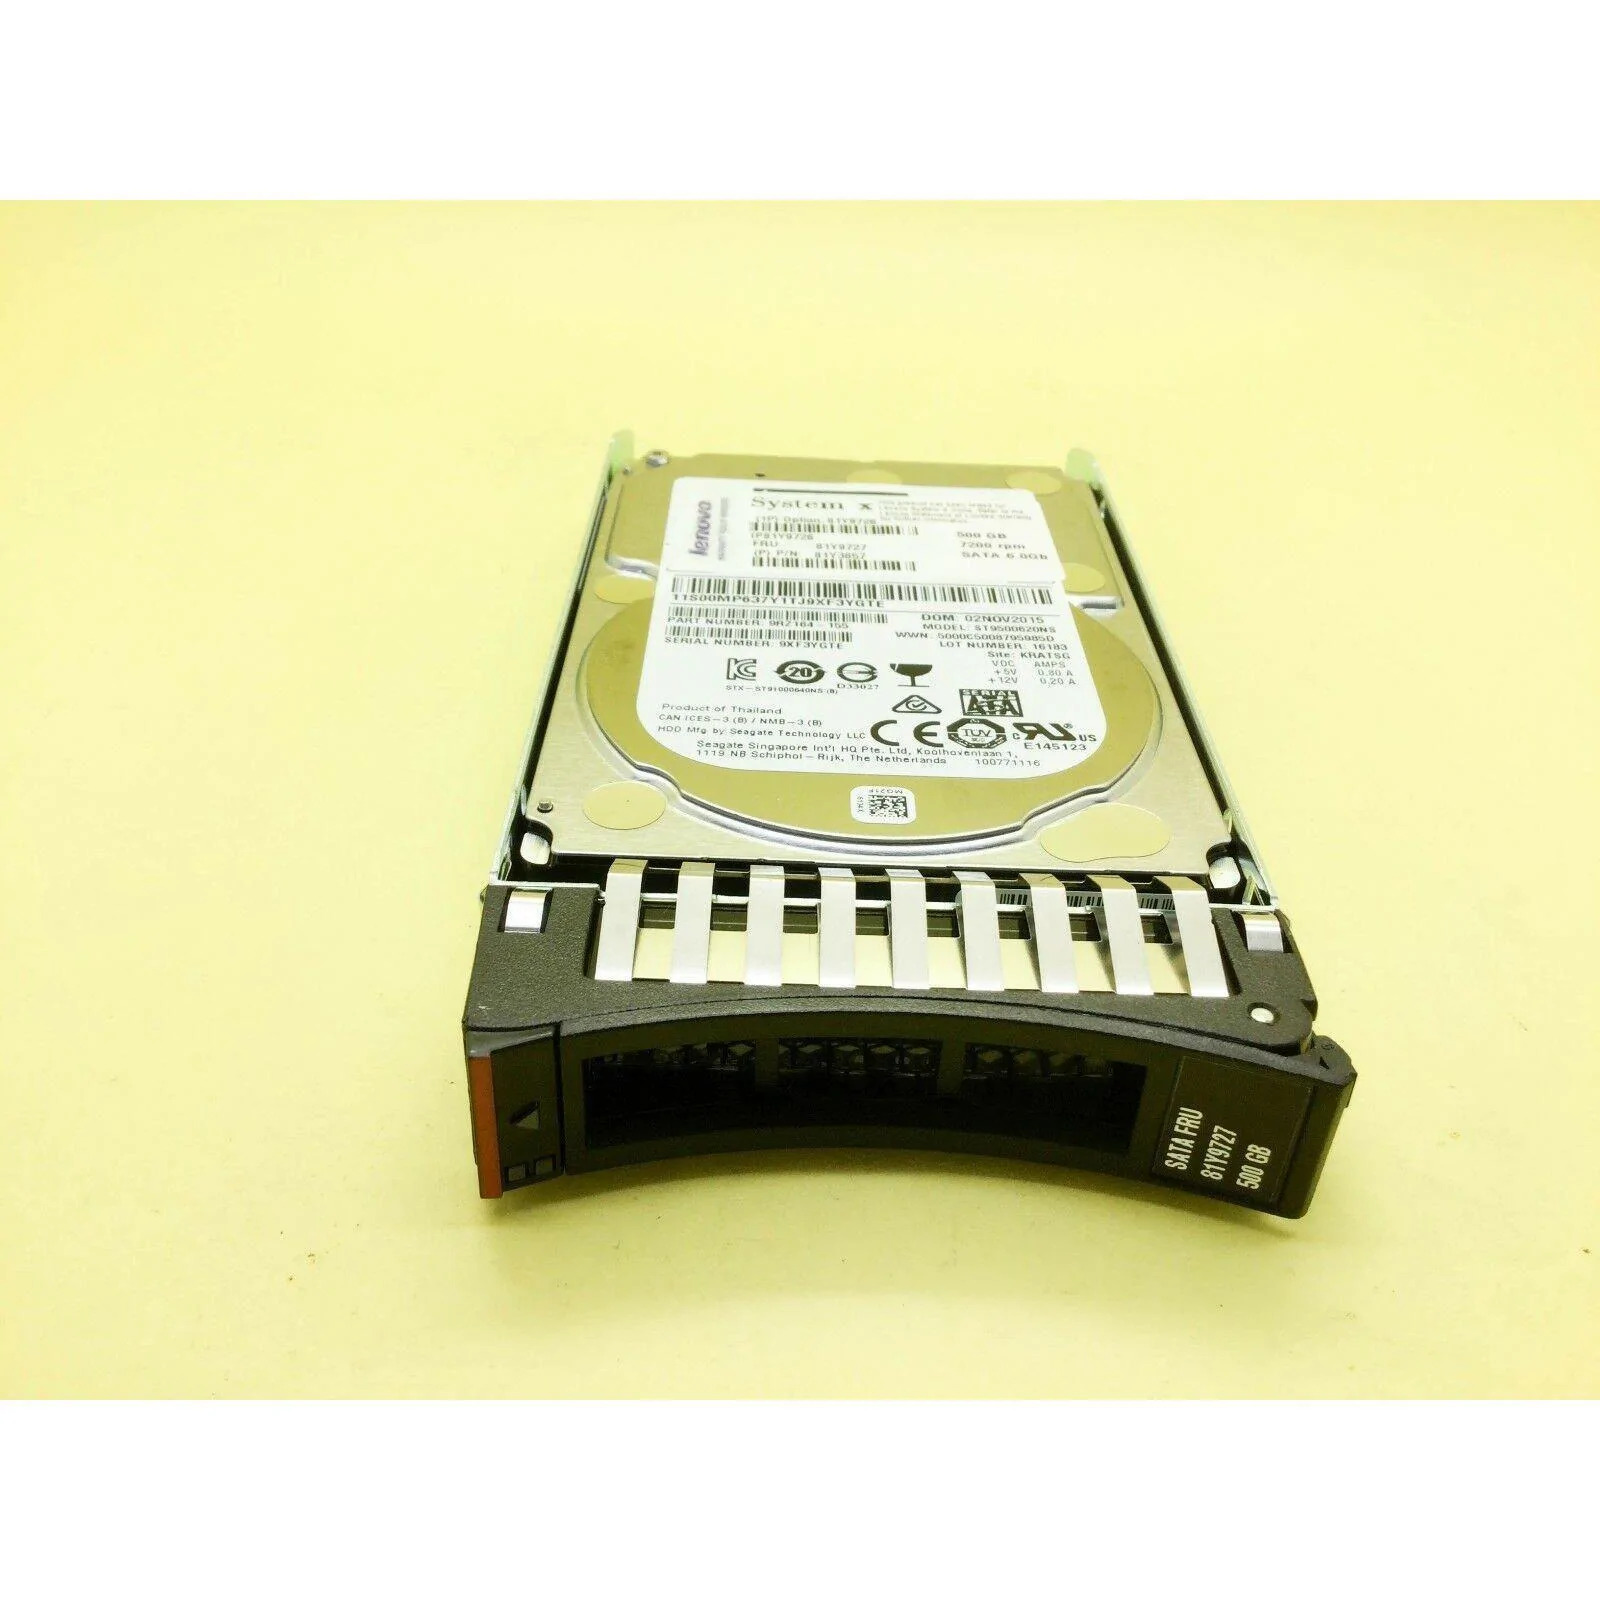 81Y9727 81Y9726 IBM/ Lenovo 500GB 7.2K 6G SFF 2.5 SATA NL HARD DRIVE 81Y3857 5711045909207 - image 3 of 3